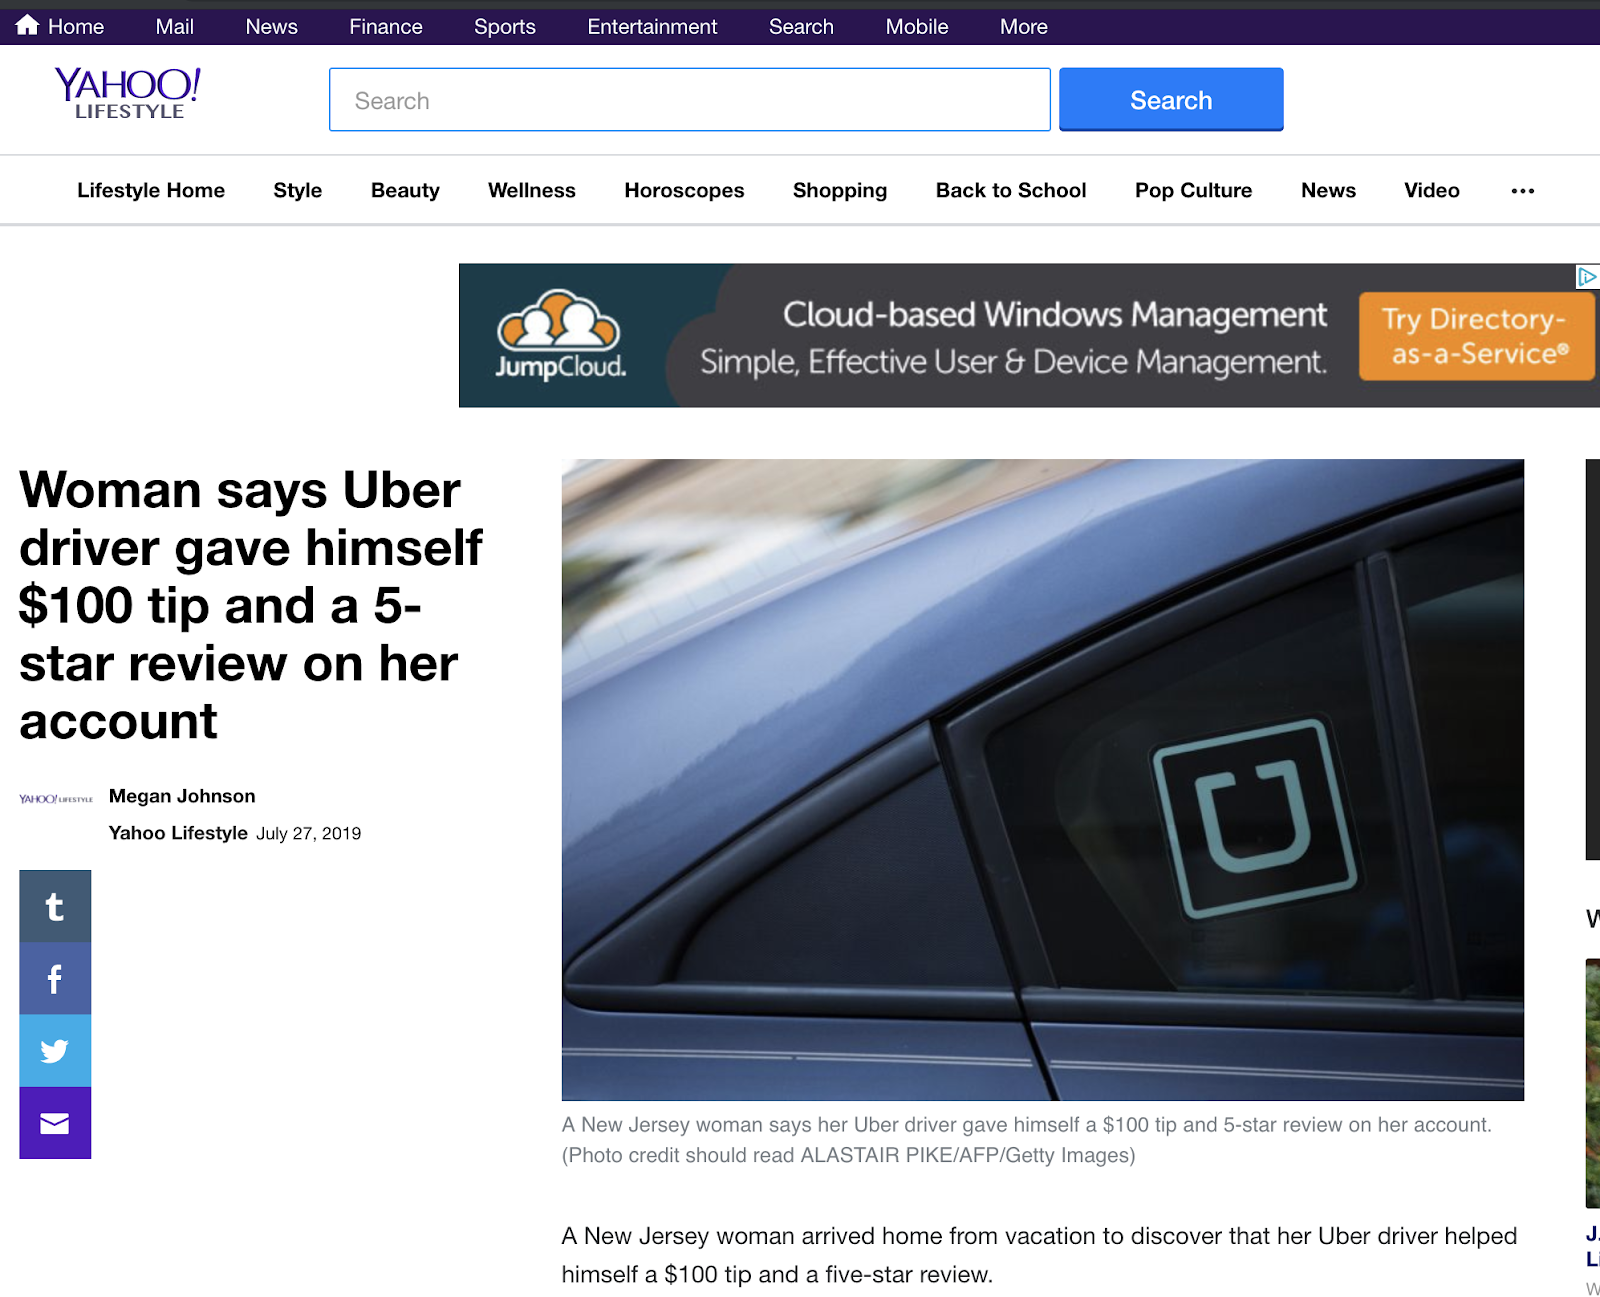 Story about an Uber driver giving himself a $100 tip using a customer's unlocked phone